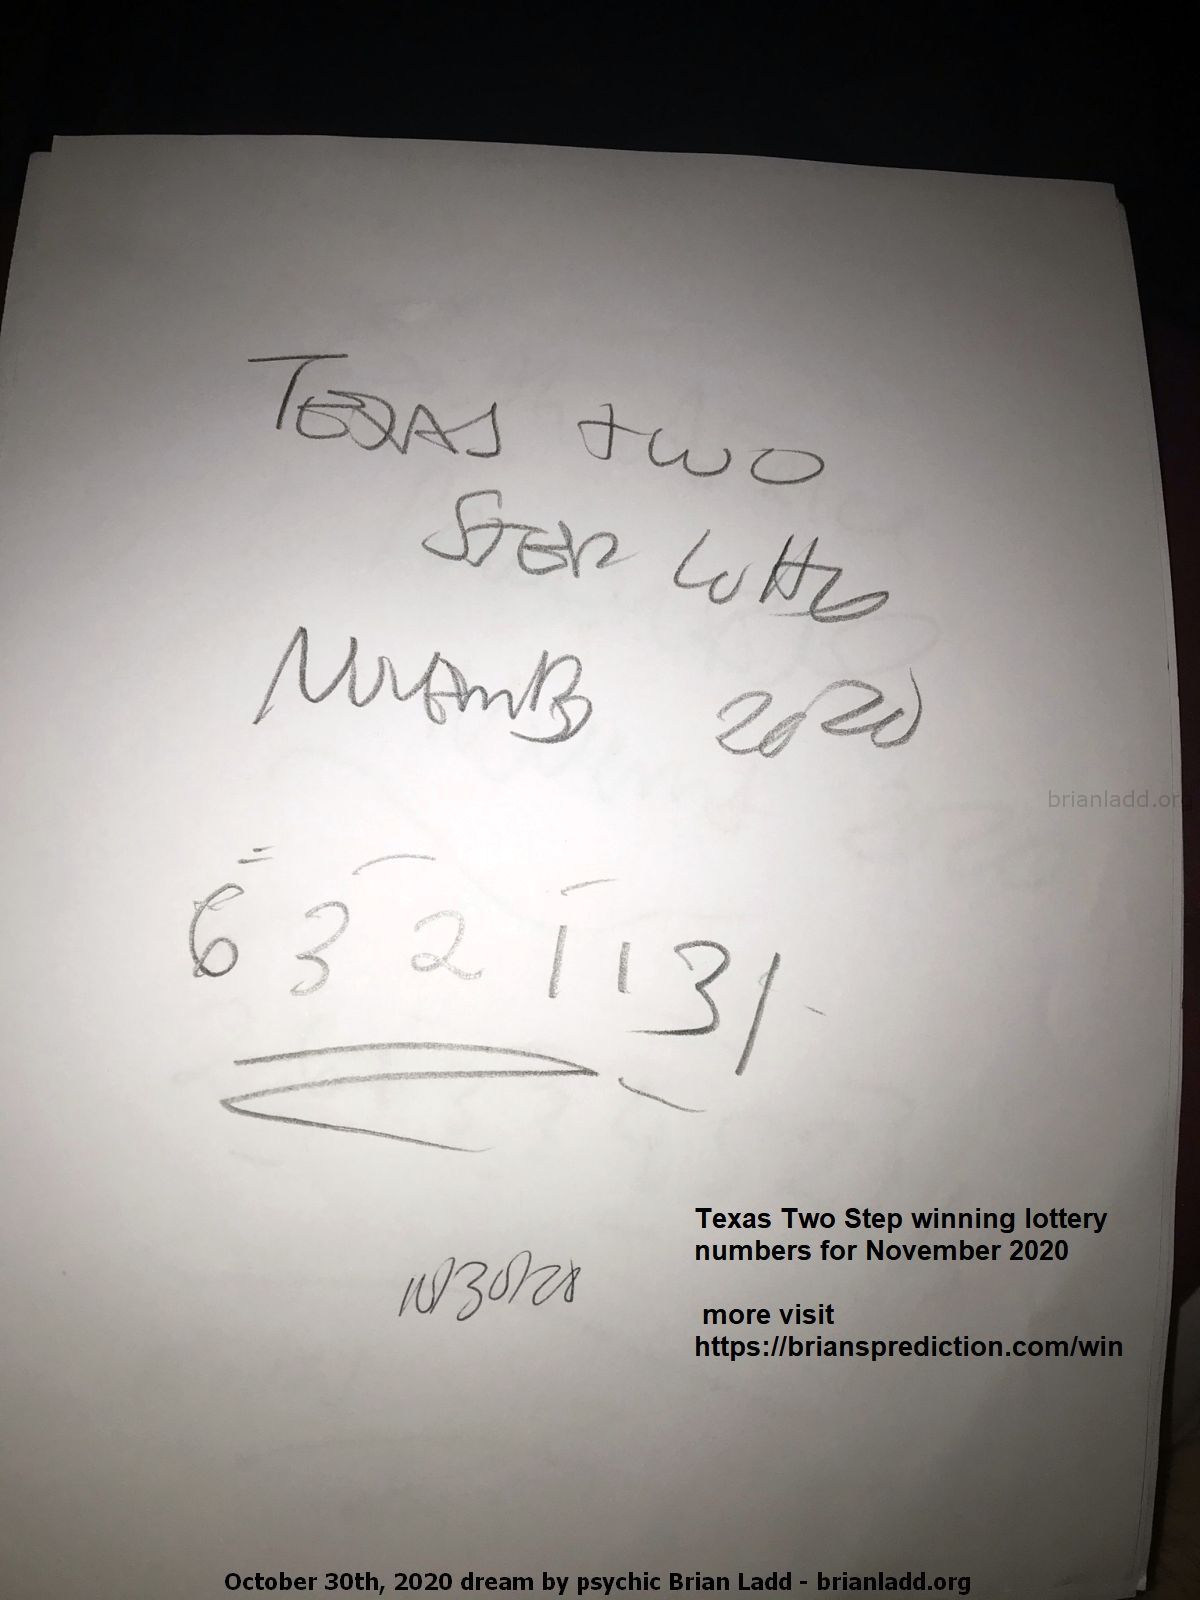 13951 30 October 2020 1 - Texas Two Step Winning Lottery Numbers For November 2020 For More Visit https://Brianspredic...
Texas Two Step Winning Lottery Numbers For November 2020 For More Visit  https://briansprediction.com/Win  ( NEW!  Free lottery picks by mail, I will personally fill out your blank lottery sheet and mail it back to you for free, postage is included!  visit  https://briansprediction.com/picksbymail   )
